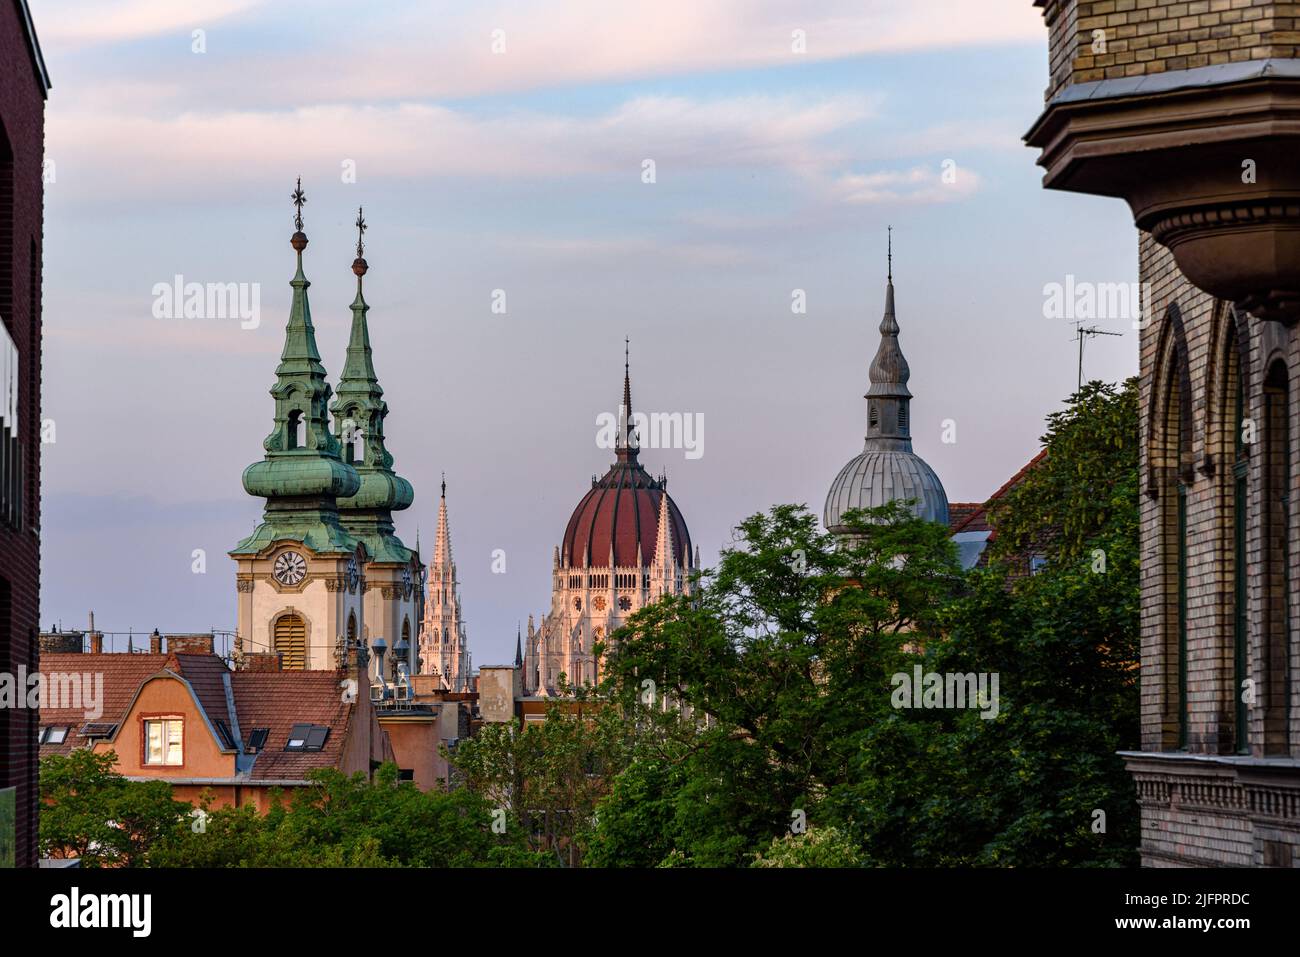 A view of the dome of the Hungarian parliament building and church spires as seen from Buda Stock Photo